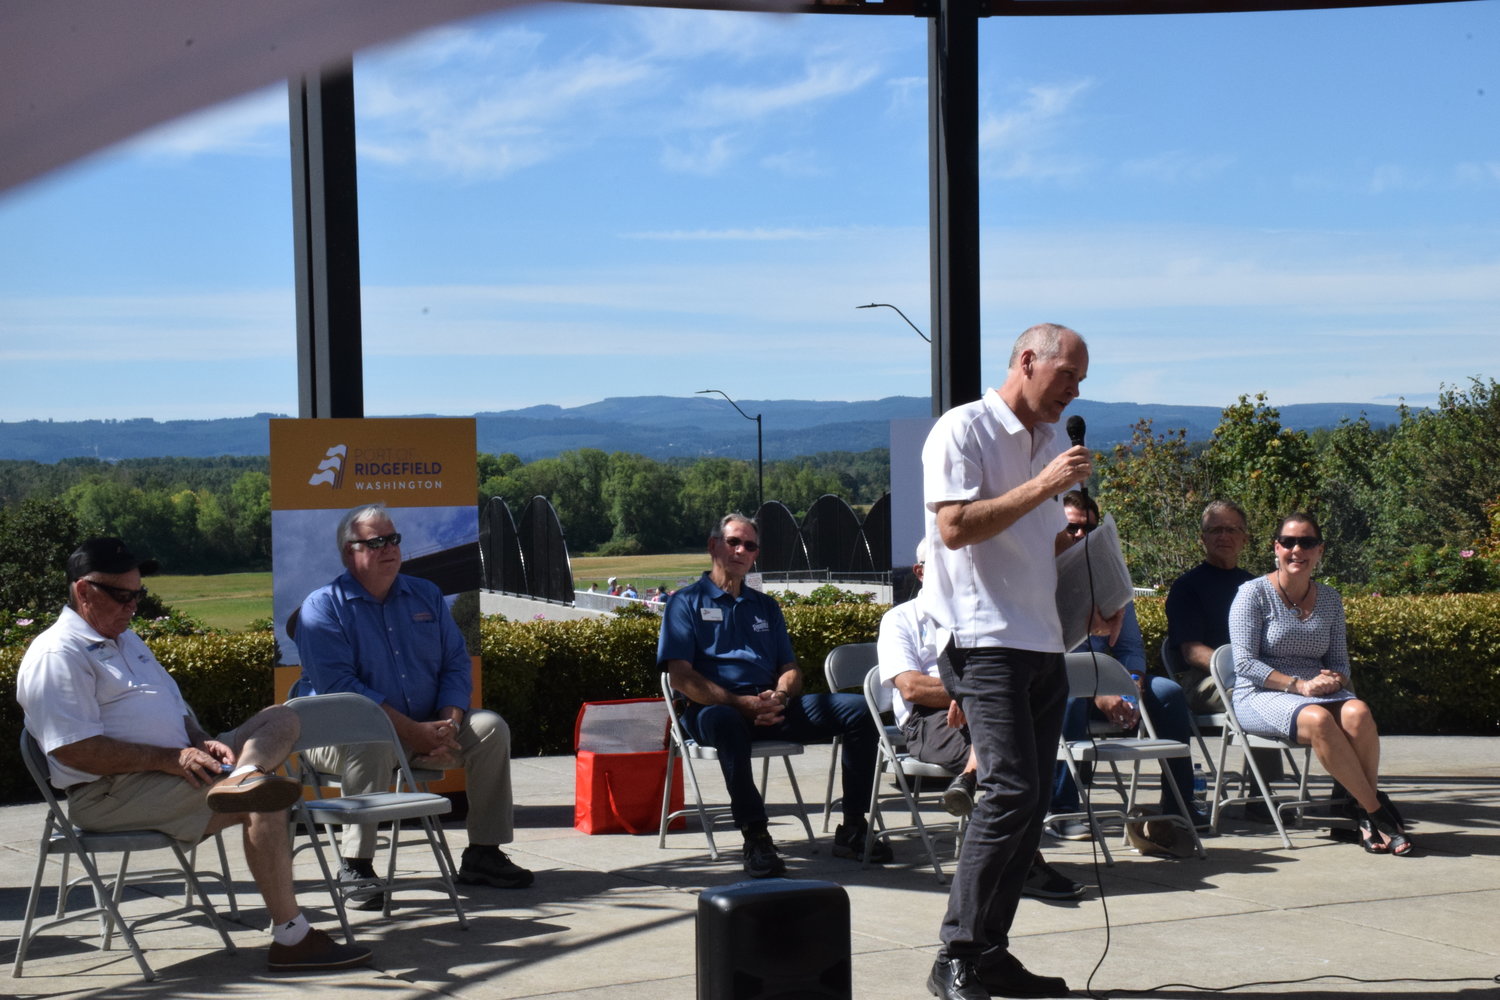 Port of Ridgefield CEO Brent Grening speaks at Overlook Park during an official opening of the Ridgefield rail overpass on Sept. 11.